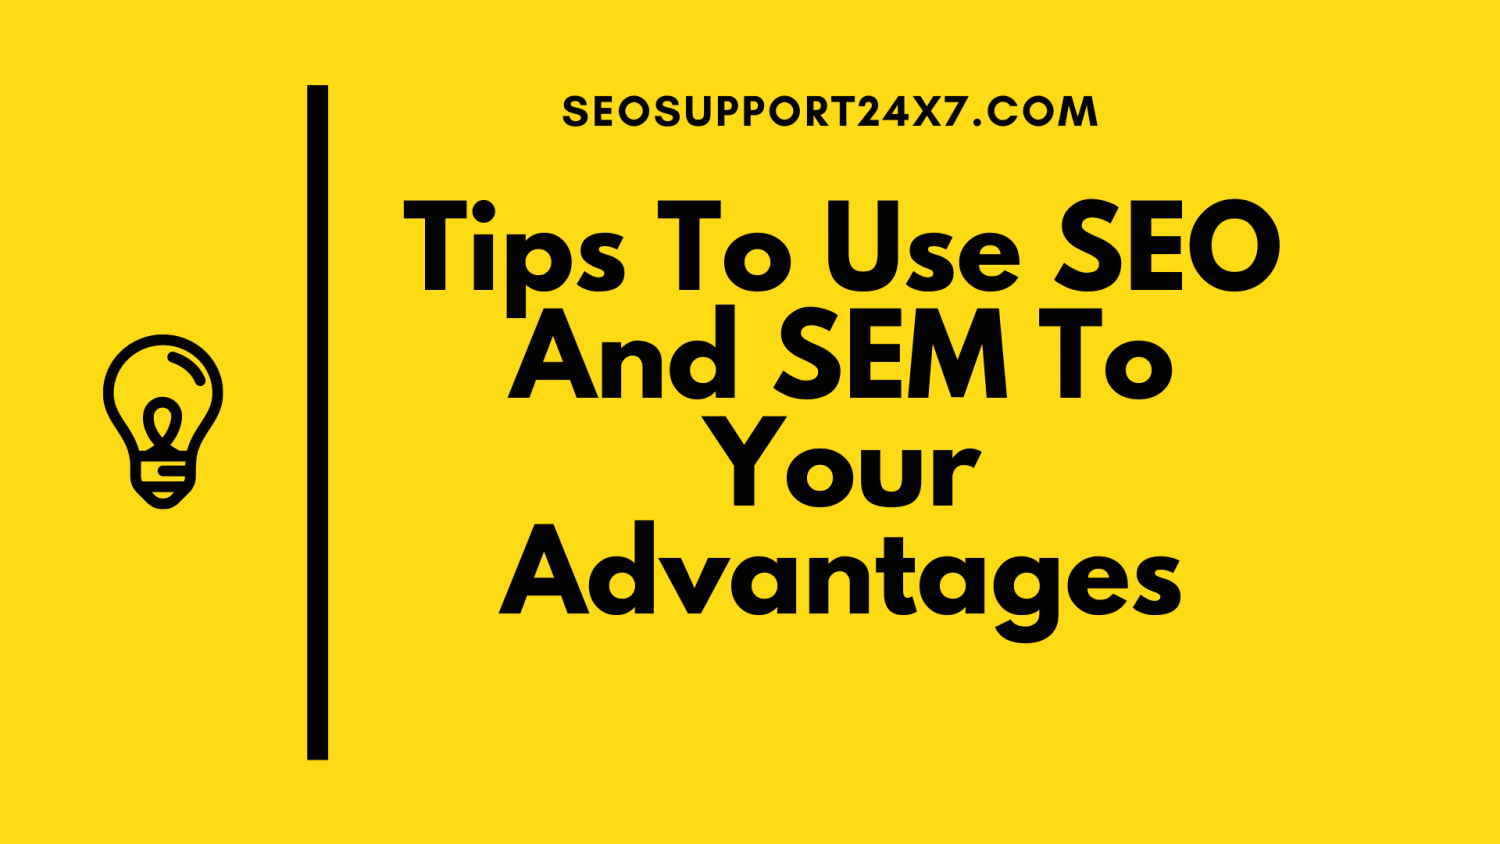 Tips To Use SEO And SEM To Your Advantages